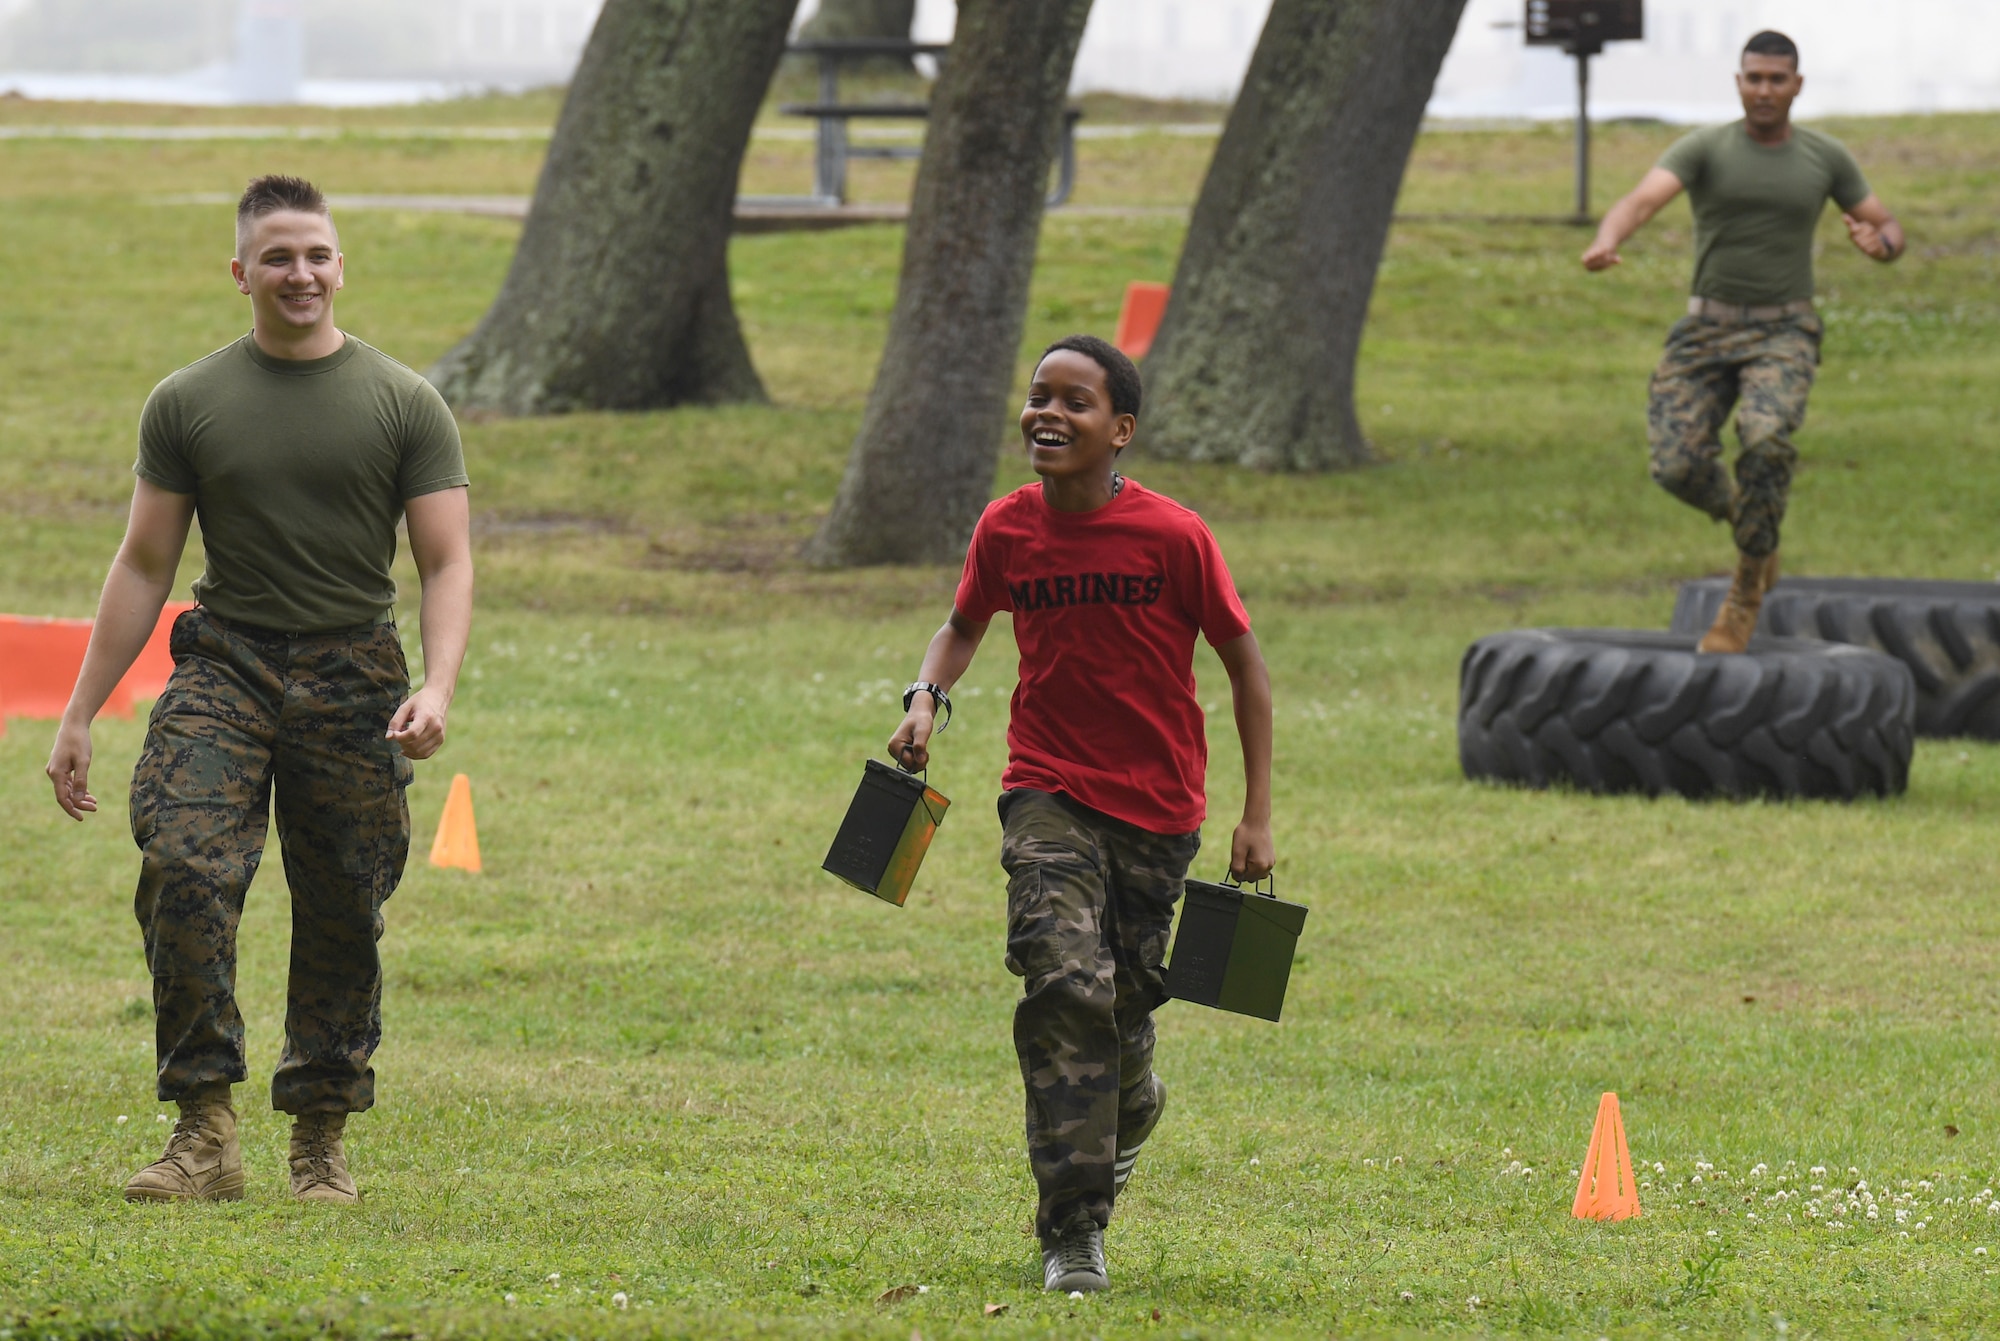 Carlos Cadet, Jr., son of U.S. Marine Corps Cpl. Jalisa Cadet, Keesler Marine Detachment administration clerk, runs through an obstacle course as he is escorted by Cpl. Davis Steiner, Keesler MARDET instructor, and followed by Pfc. Janathan Singh, Keesler MARDET student, during Operation Hero at Keesler Air Force Base, Mississippi, April 6, 2019. The event, hosted by the Airman and Family Readiness Center in recognition of the Month of the Military Child, gave military children a glimpse into the lives of deployed military members. Children received Operation Hero dog tags and t-shirts as they made their way through the mock deployment line as well as the opportunity to experience medical triage demonstrations, gas mask training and have their faces painted. (U.S. Air Force photo by Kemberly Groue)